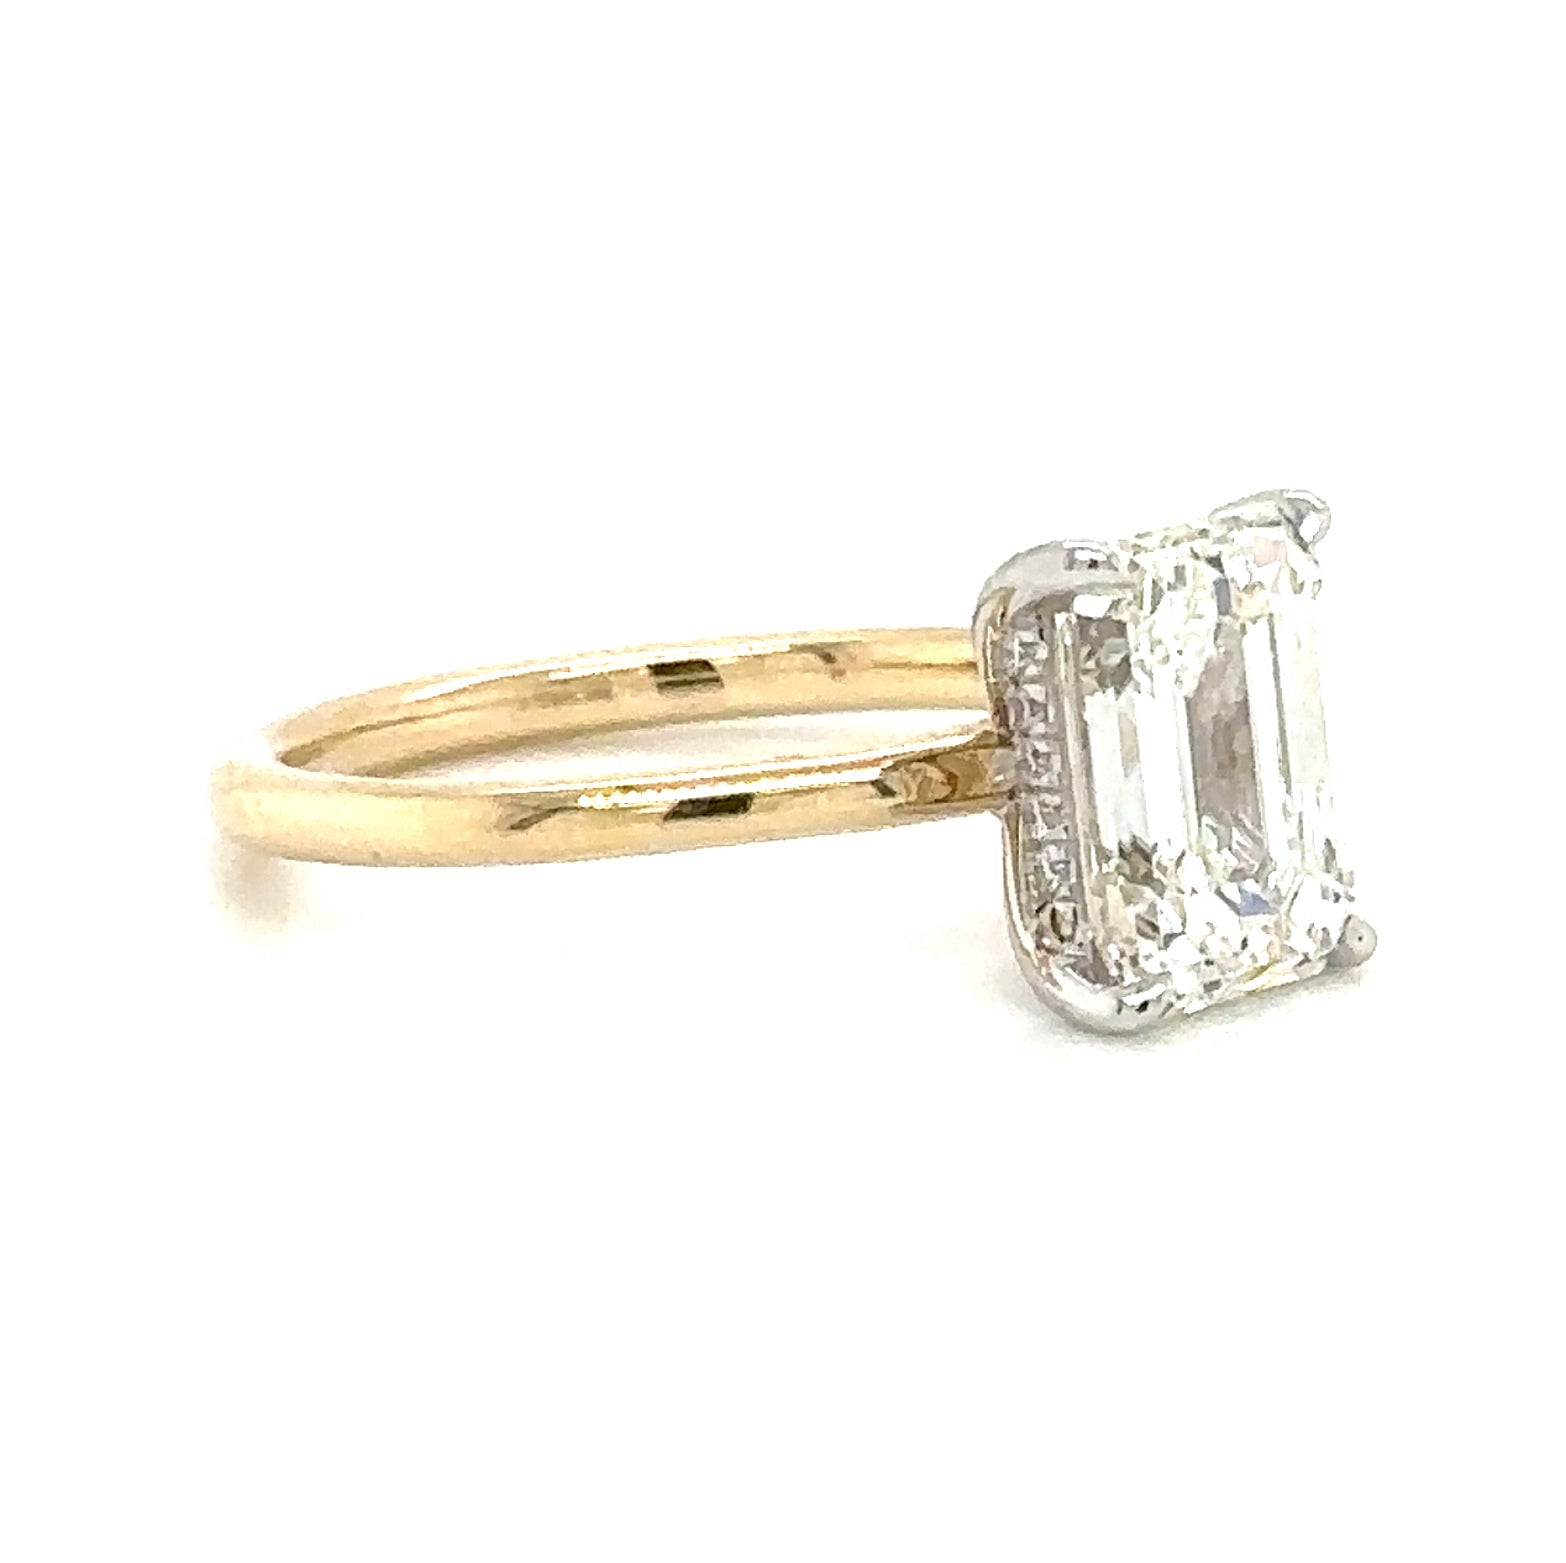 GIA Certified 2.50carat Emerald Cut Diamond Engagement Solitaire Ring